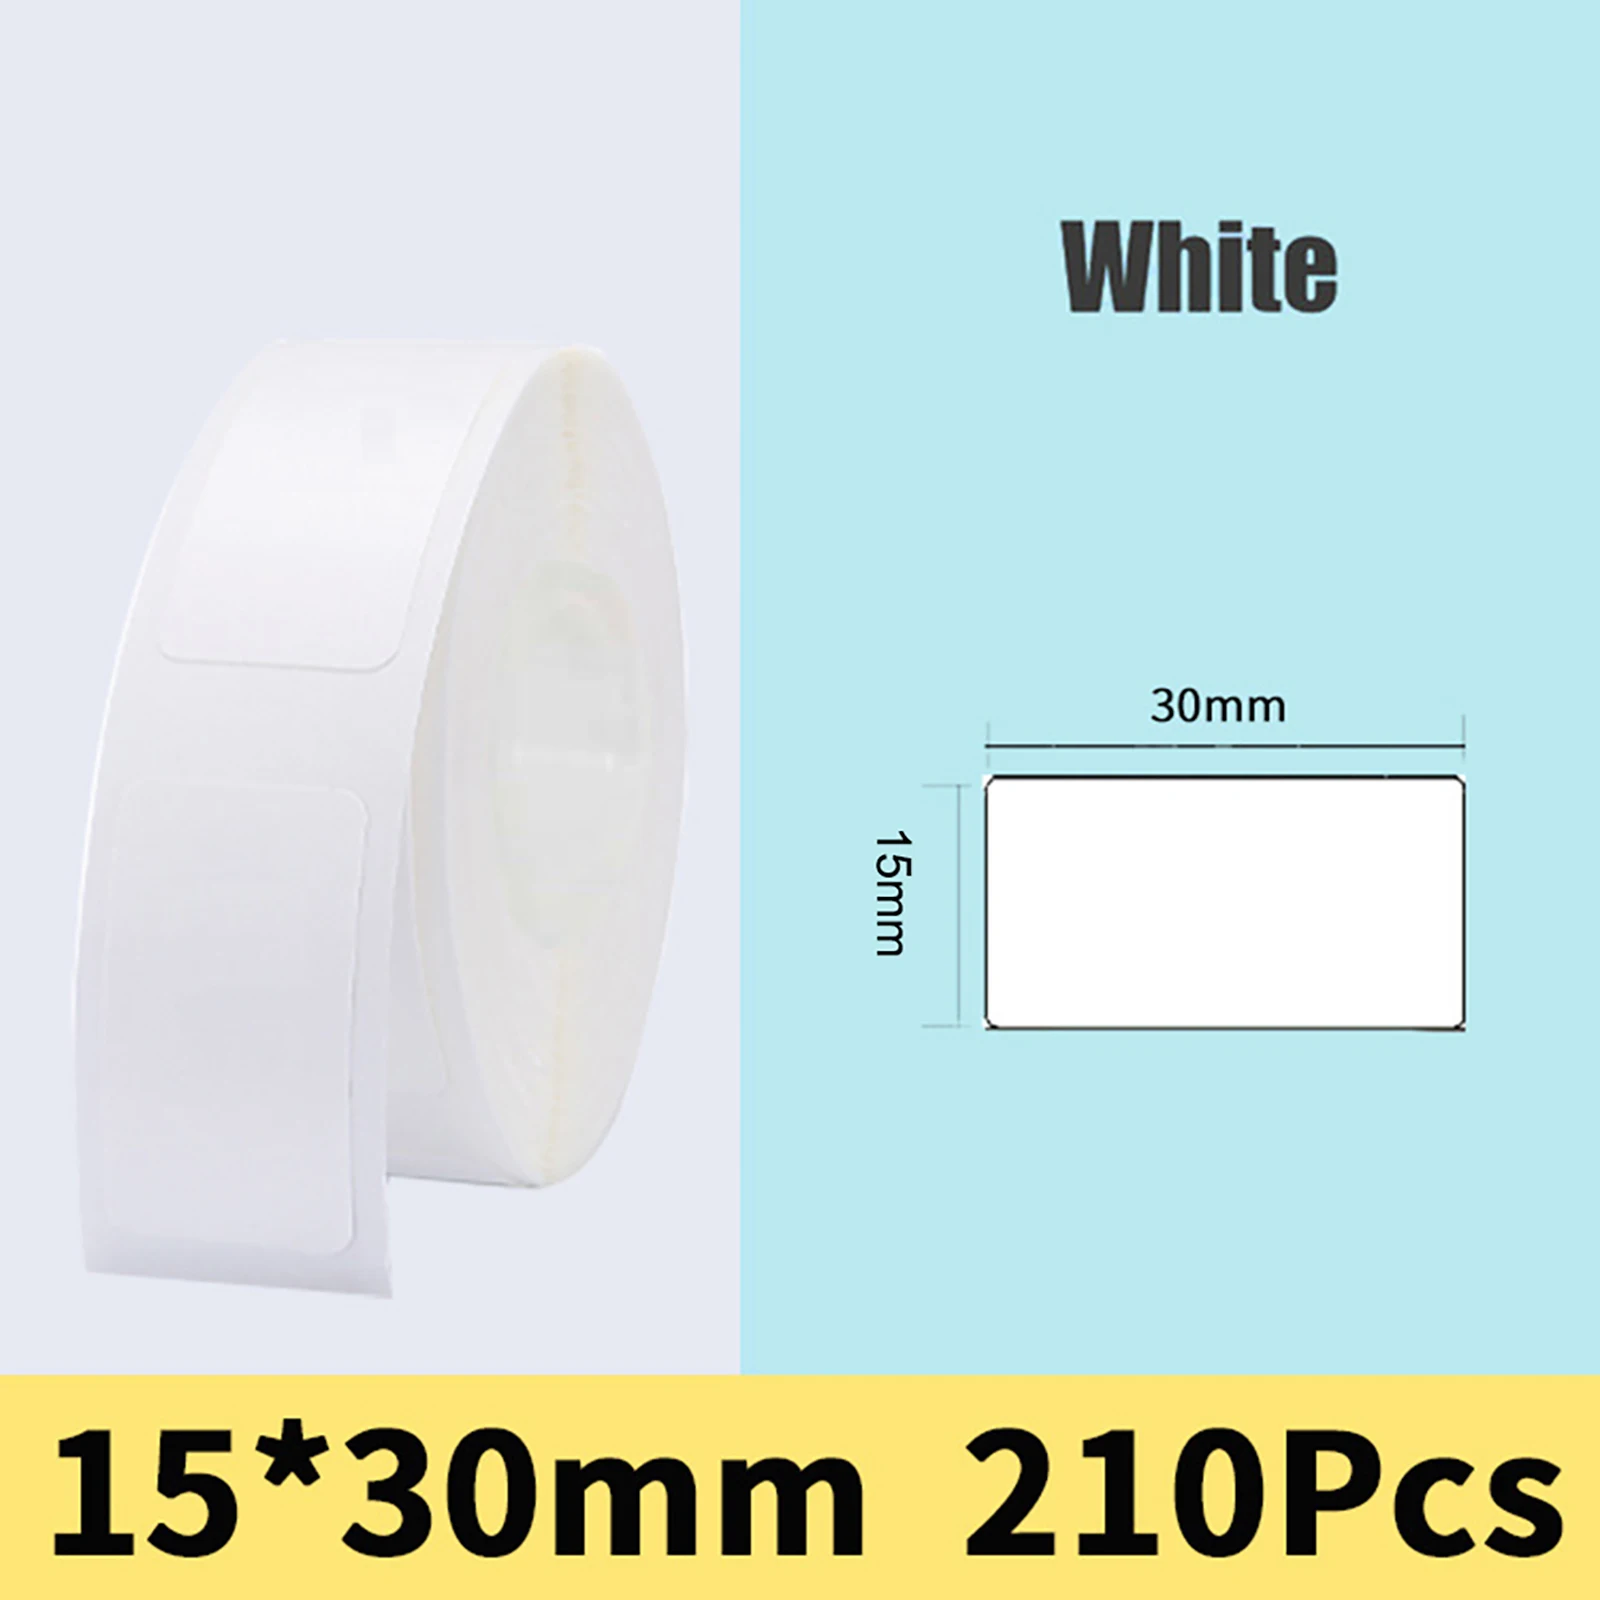 Thermal Labels Printer Sticker Paper With Self Adhesive For D11 D110 Label Maker 15*30mm 210pcs Rectangular Label Pape